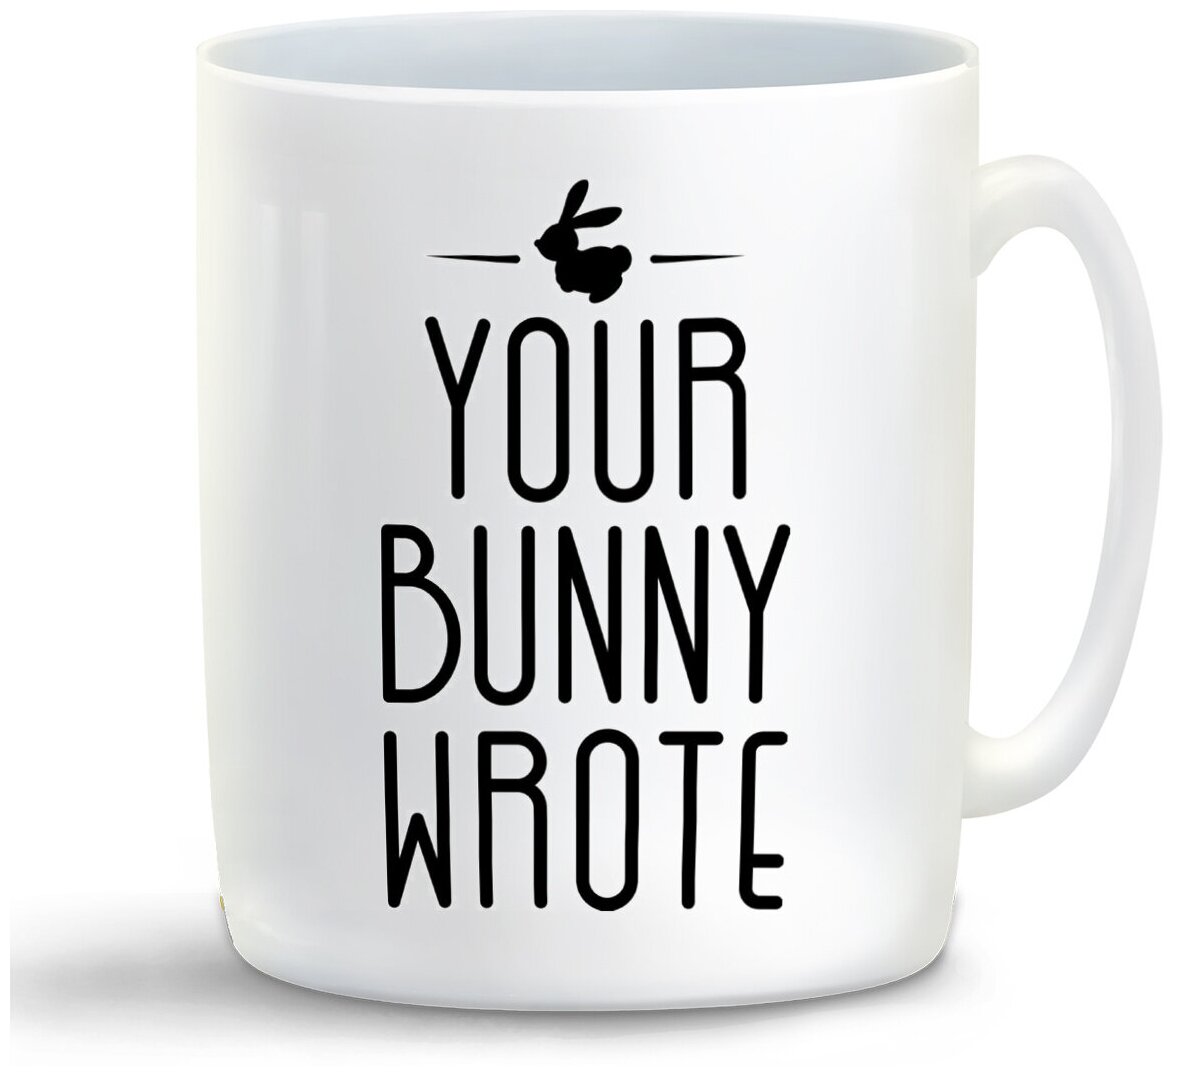 Your bunny wrote steam фото 9